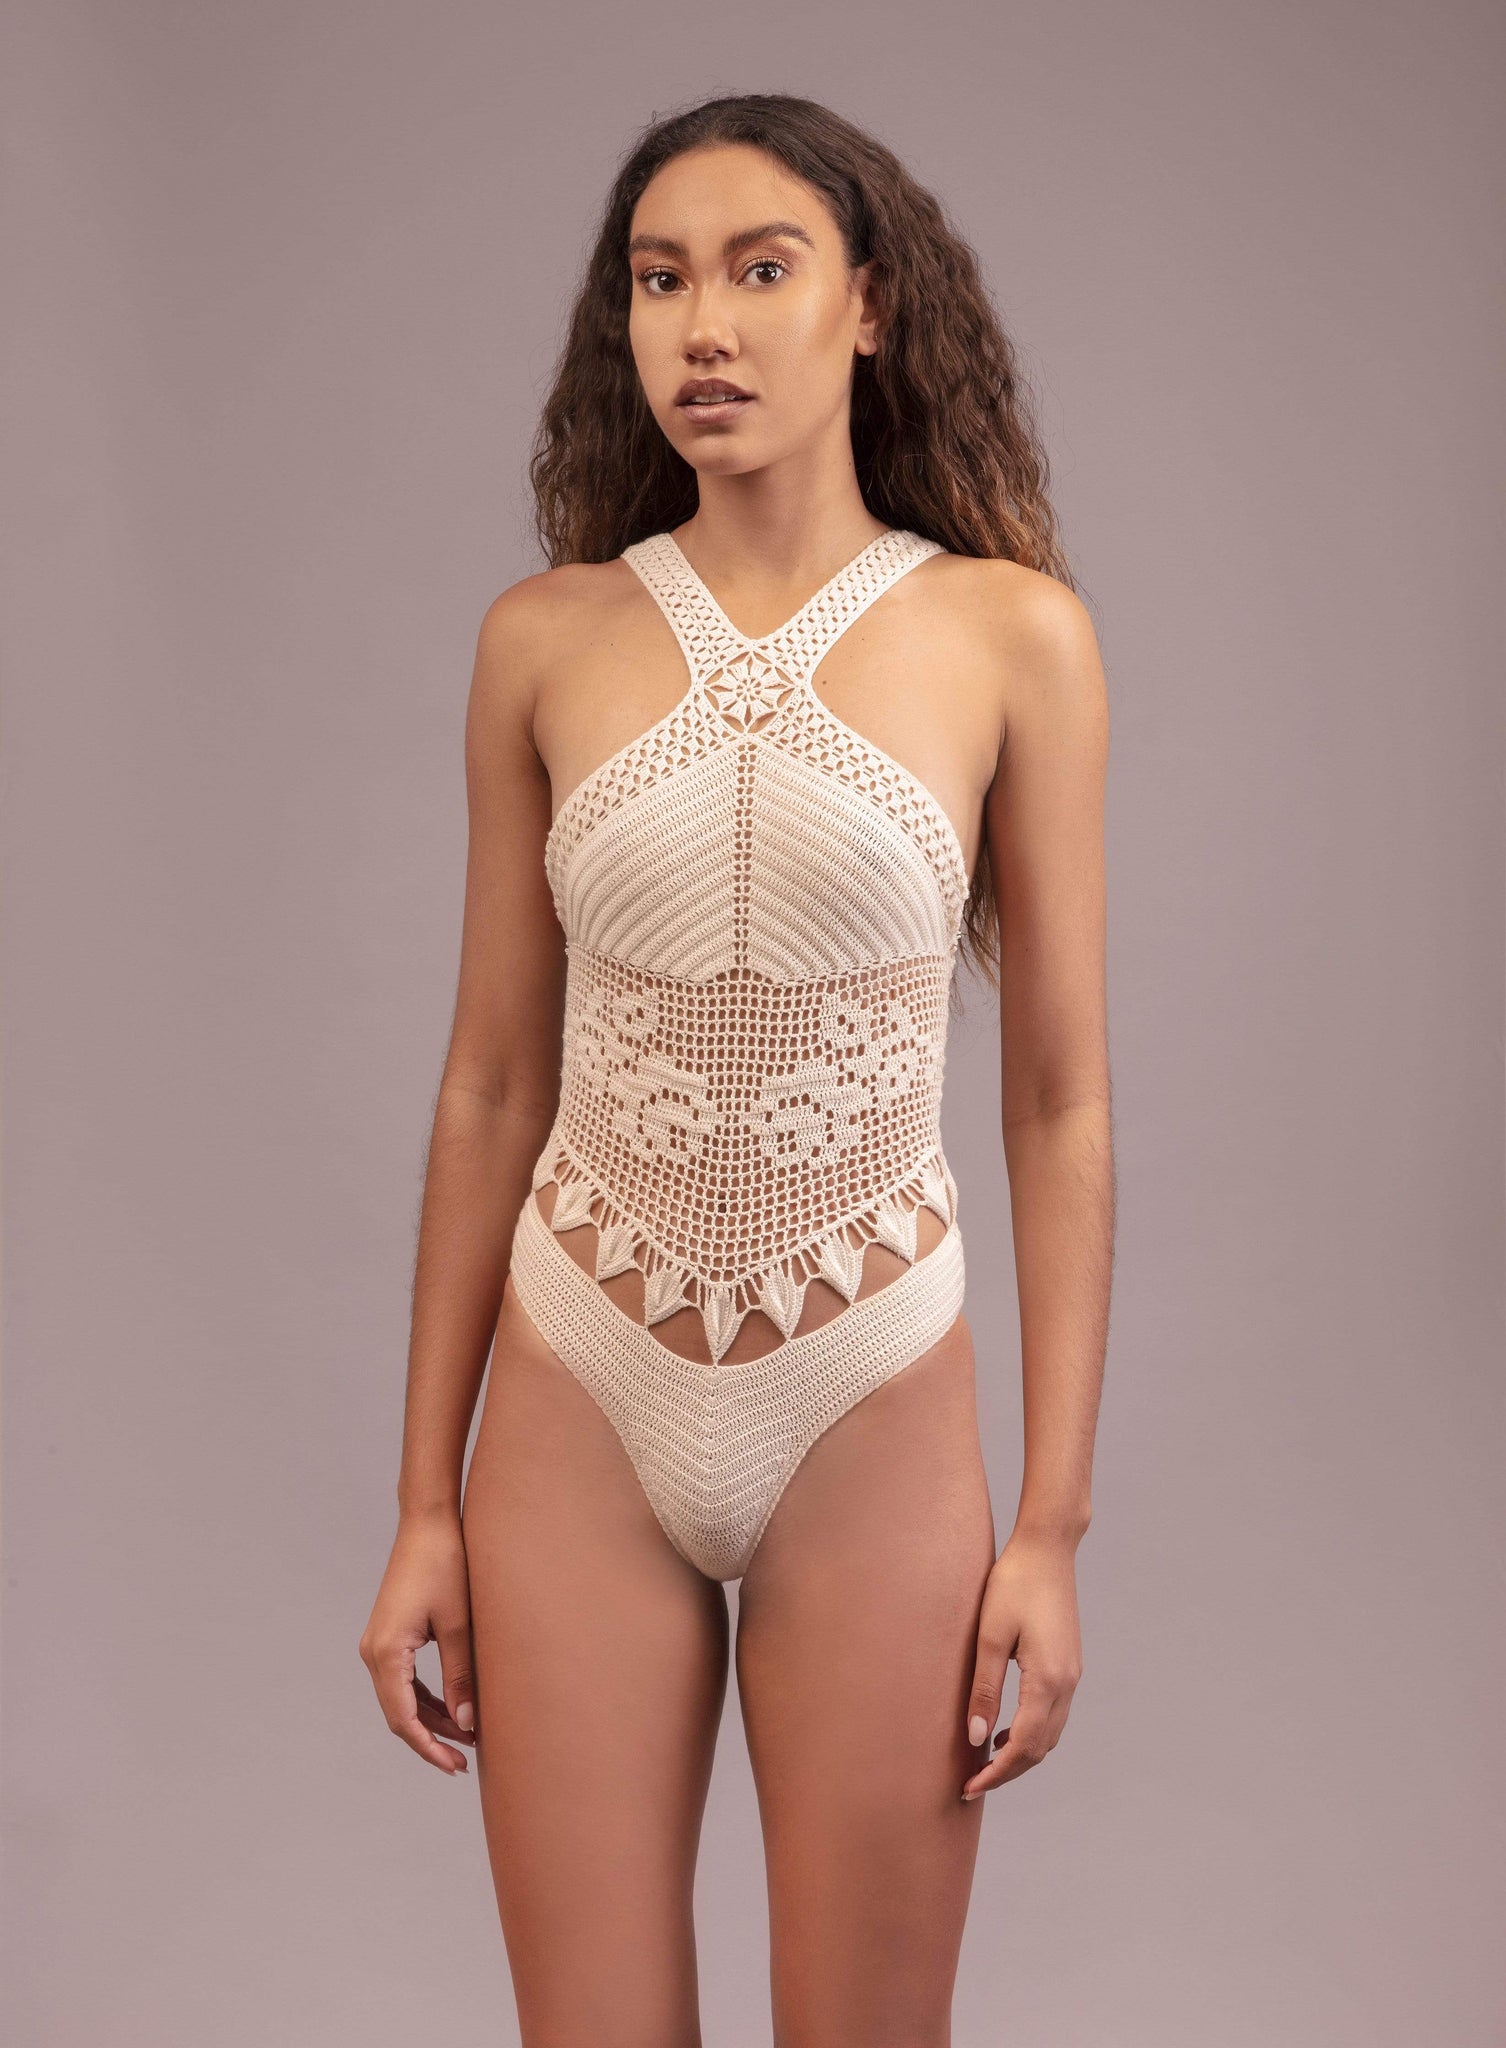 One piece bridal rich crochet swimsuit with white criss-cross halter neck